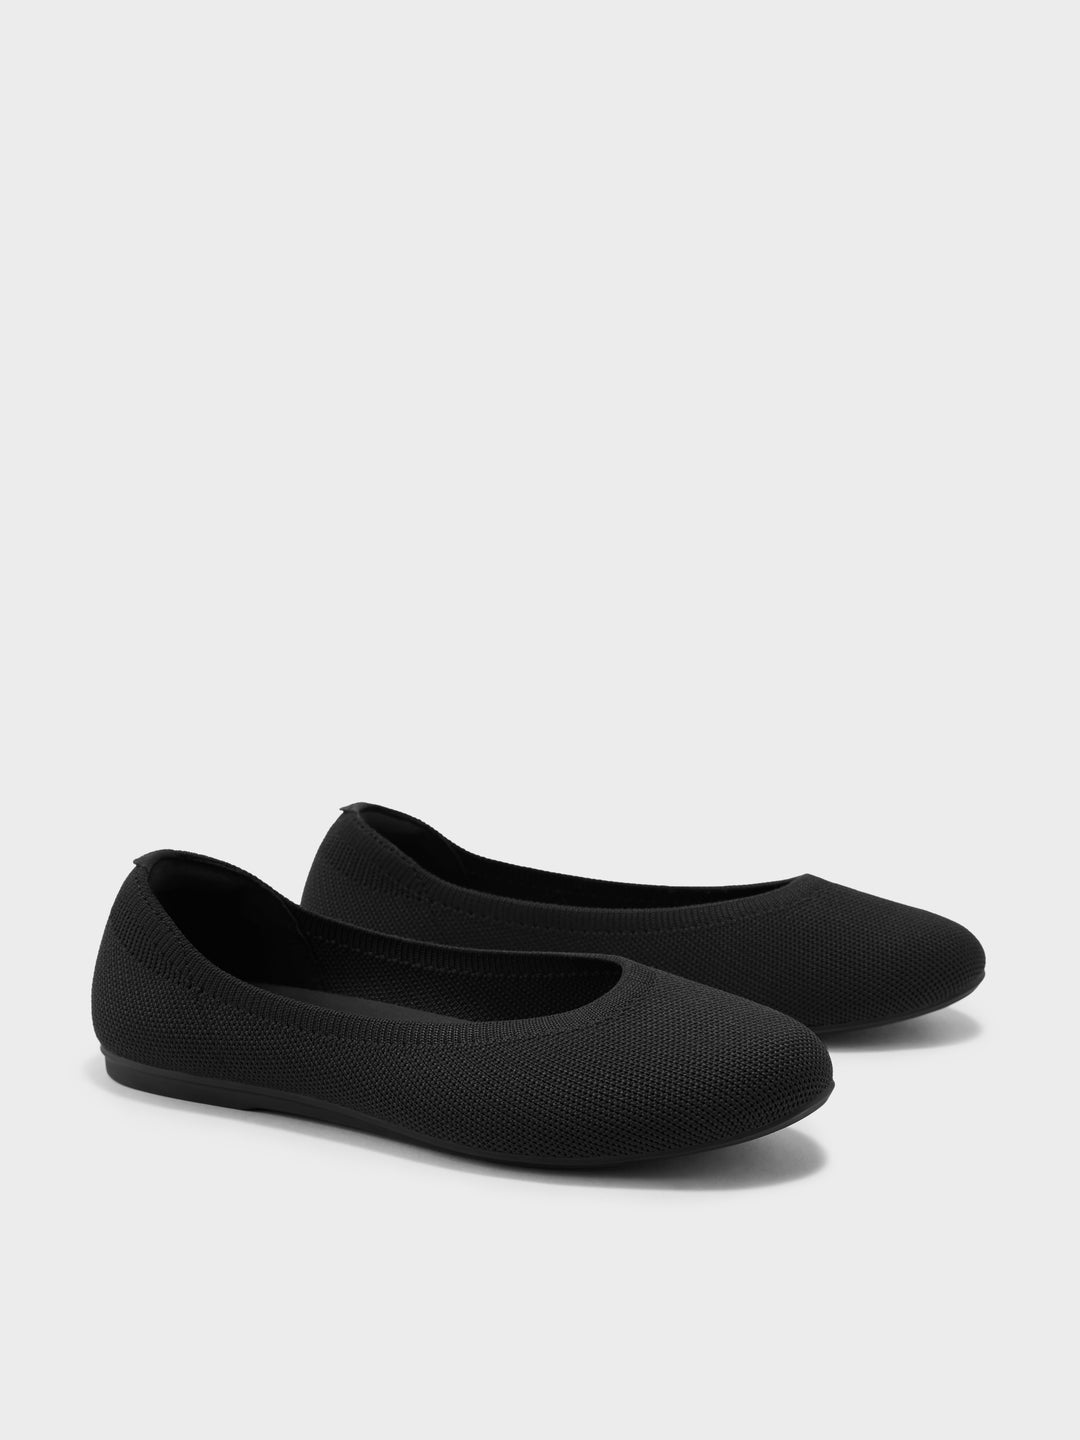 Arromic Black Flats Shoes for Women, Square Toe Ballet Flats  Shoes with Arch Support, Washable Comfortable Knit Flats for Women, Soft  Slip on Black Flats for Dressy Wedding Work Office